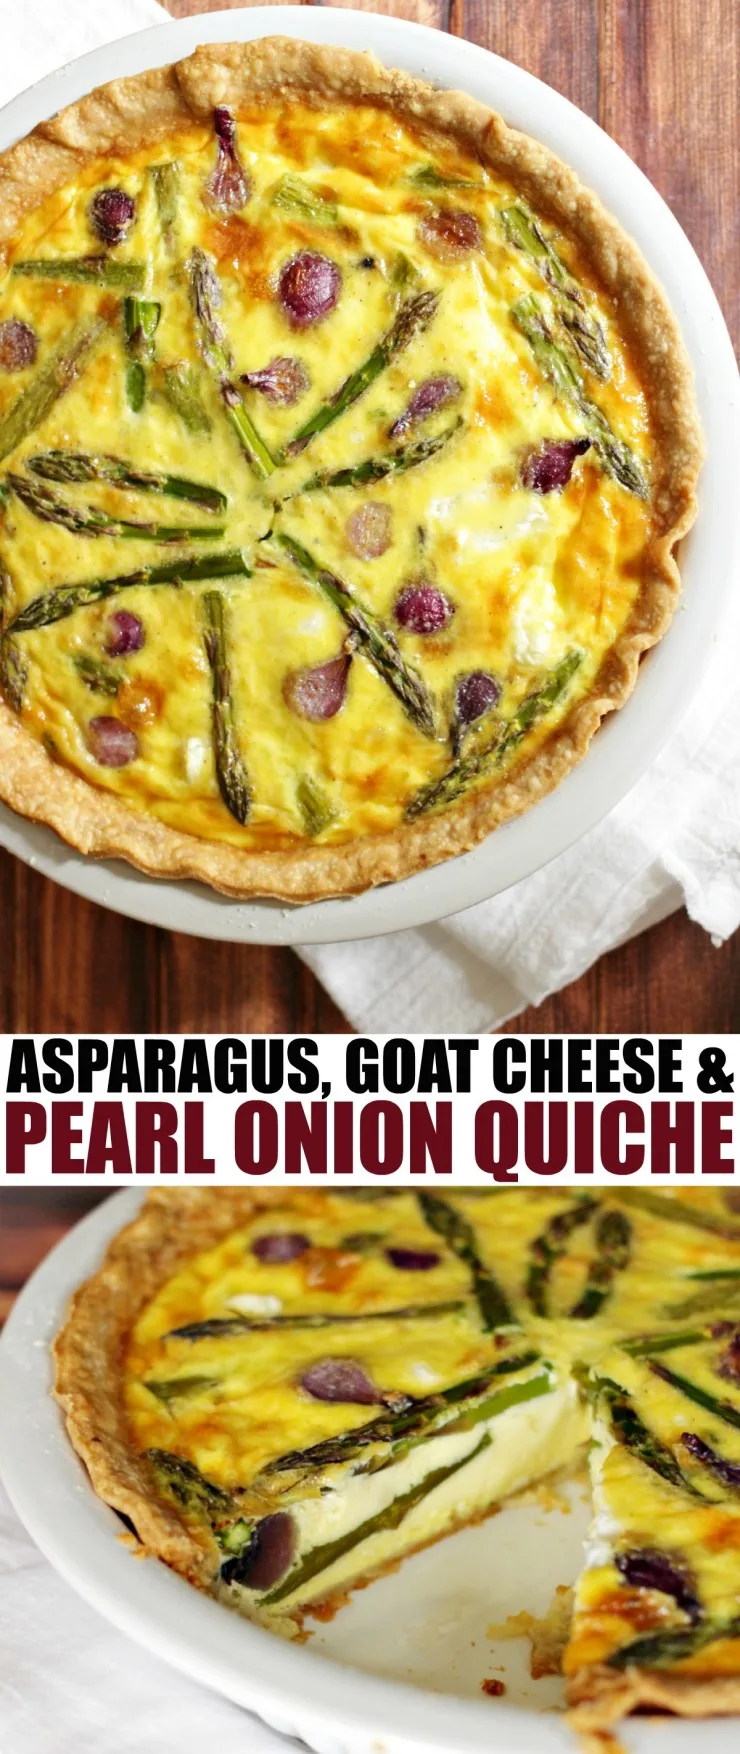 Asparagus, Goat Cheese and Pearl Onion Quiche for a fresh, Spring inspired family dinner featuring plenty of delicious eggs!